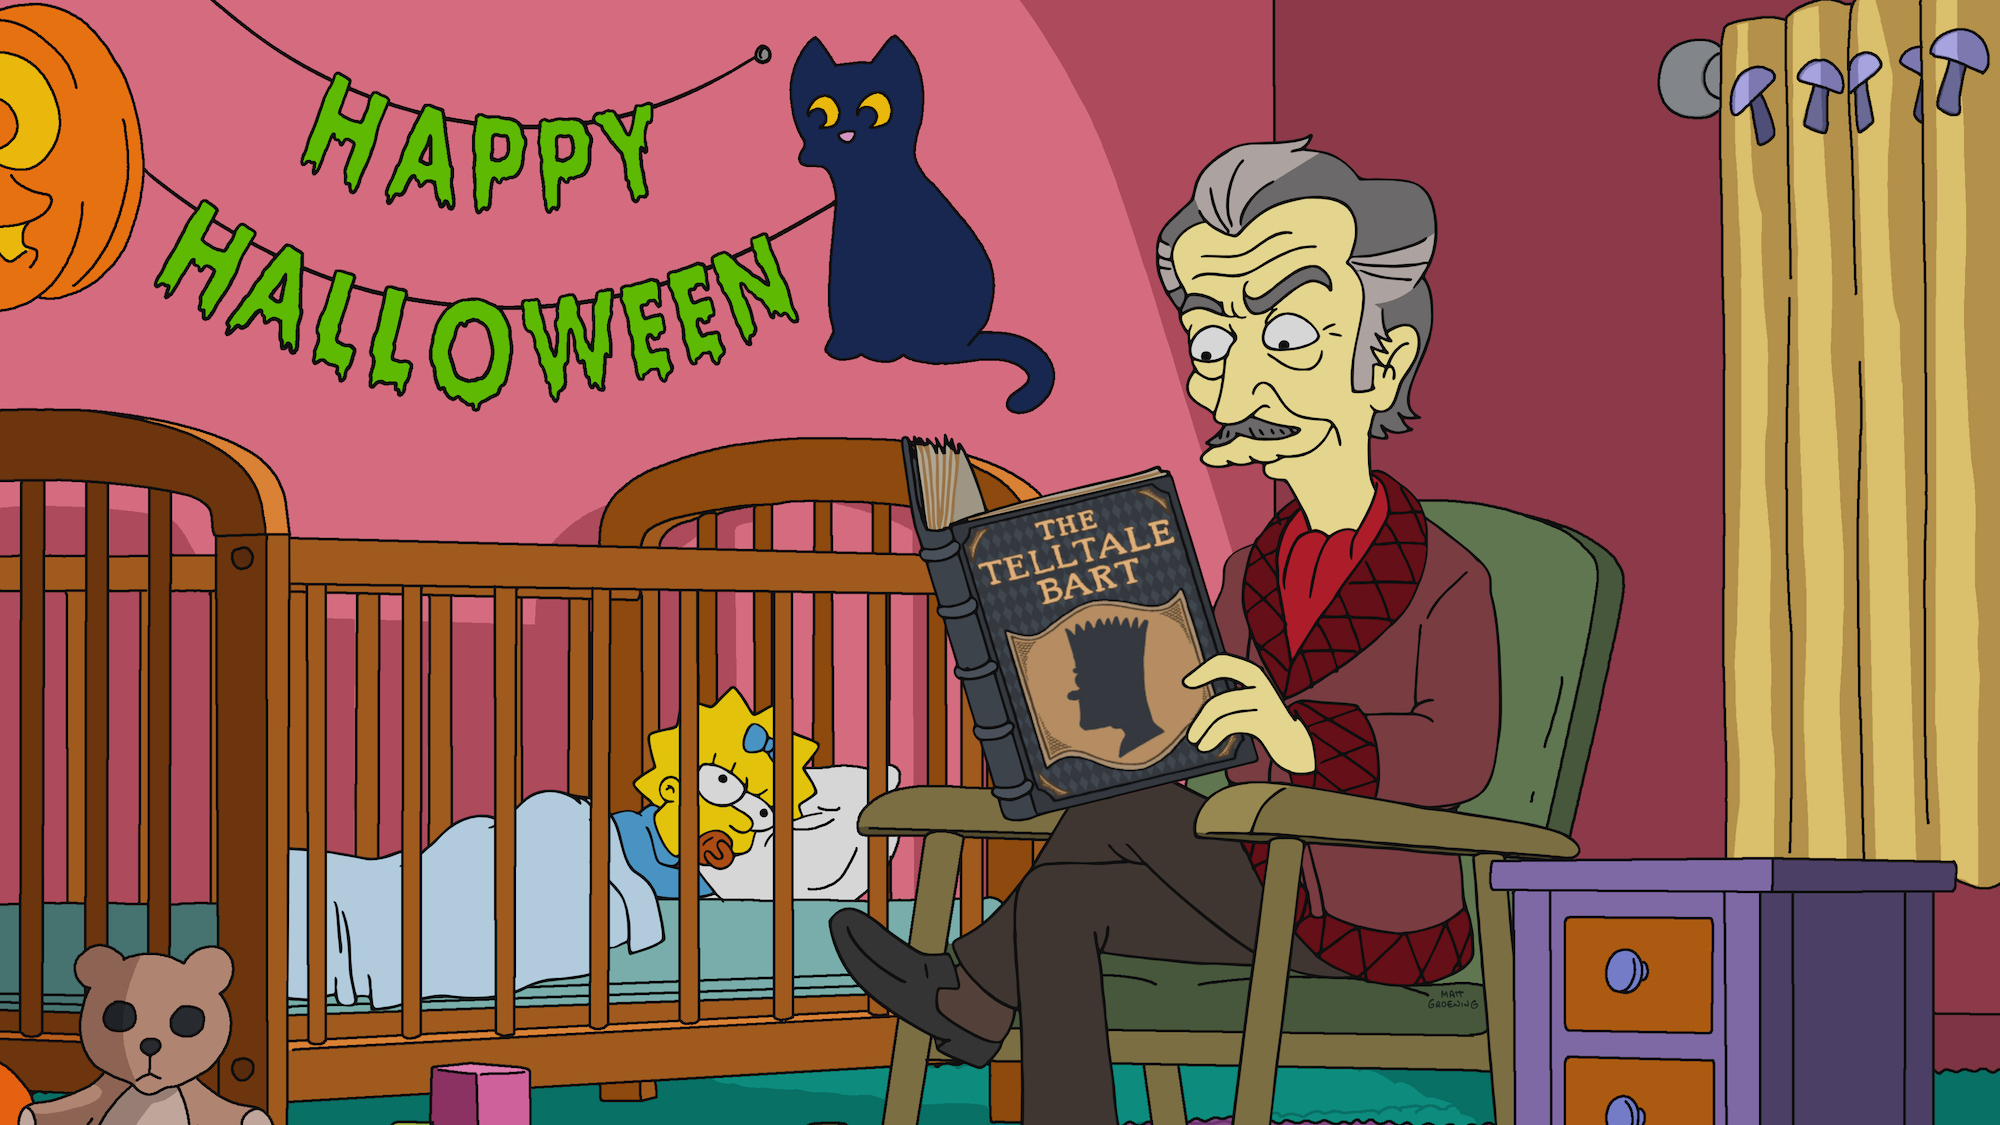 The Simpsons' Vincent Price reads to Maggie